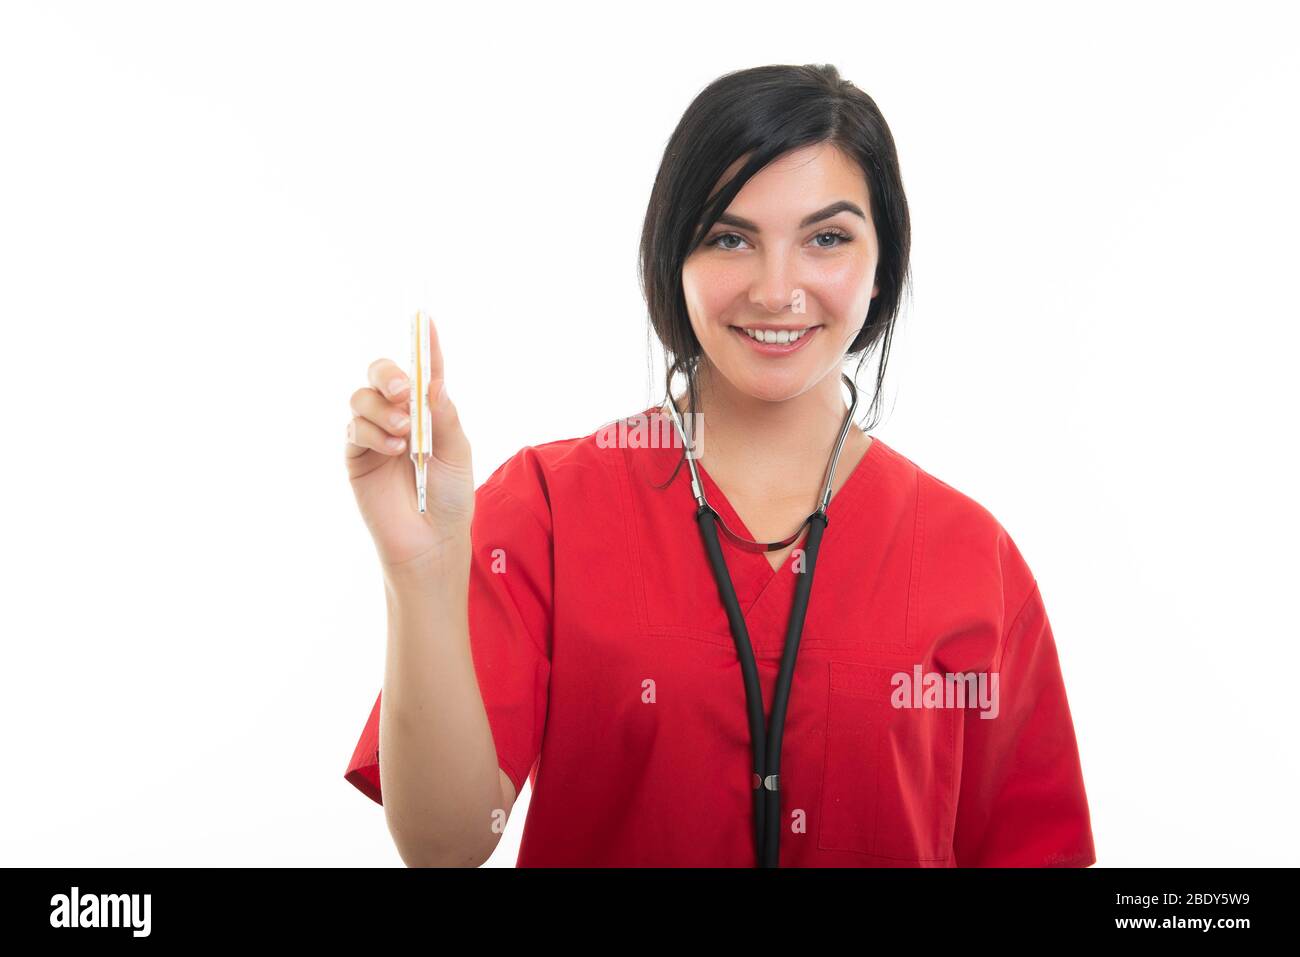 Portrait of young attractive female nurse showing thermometer isolated on white background with copy space advertising area Stock Photo